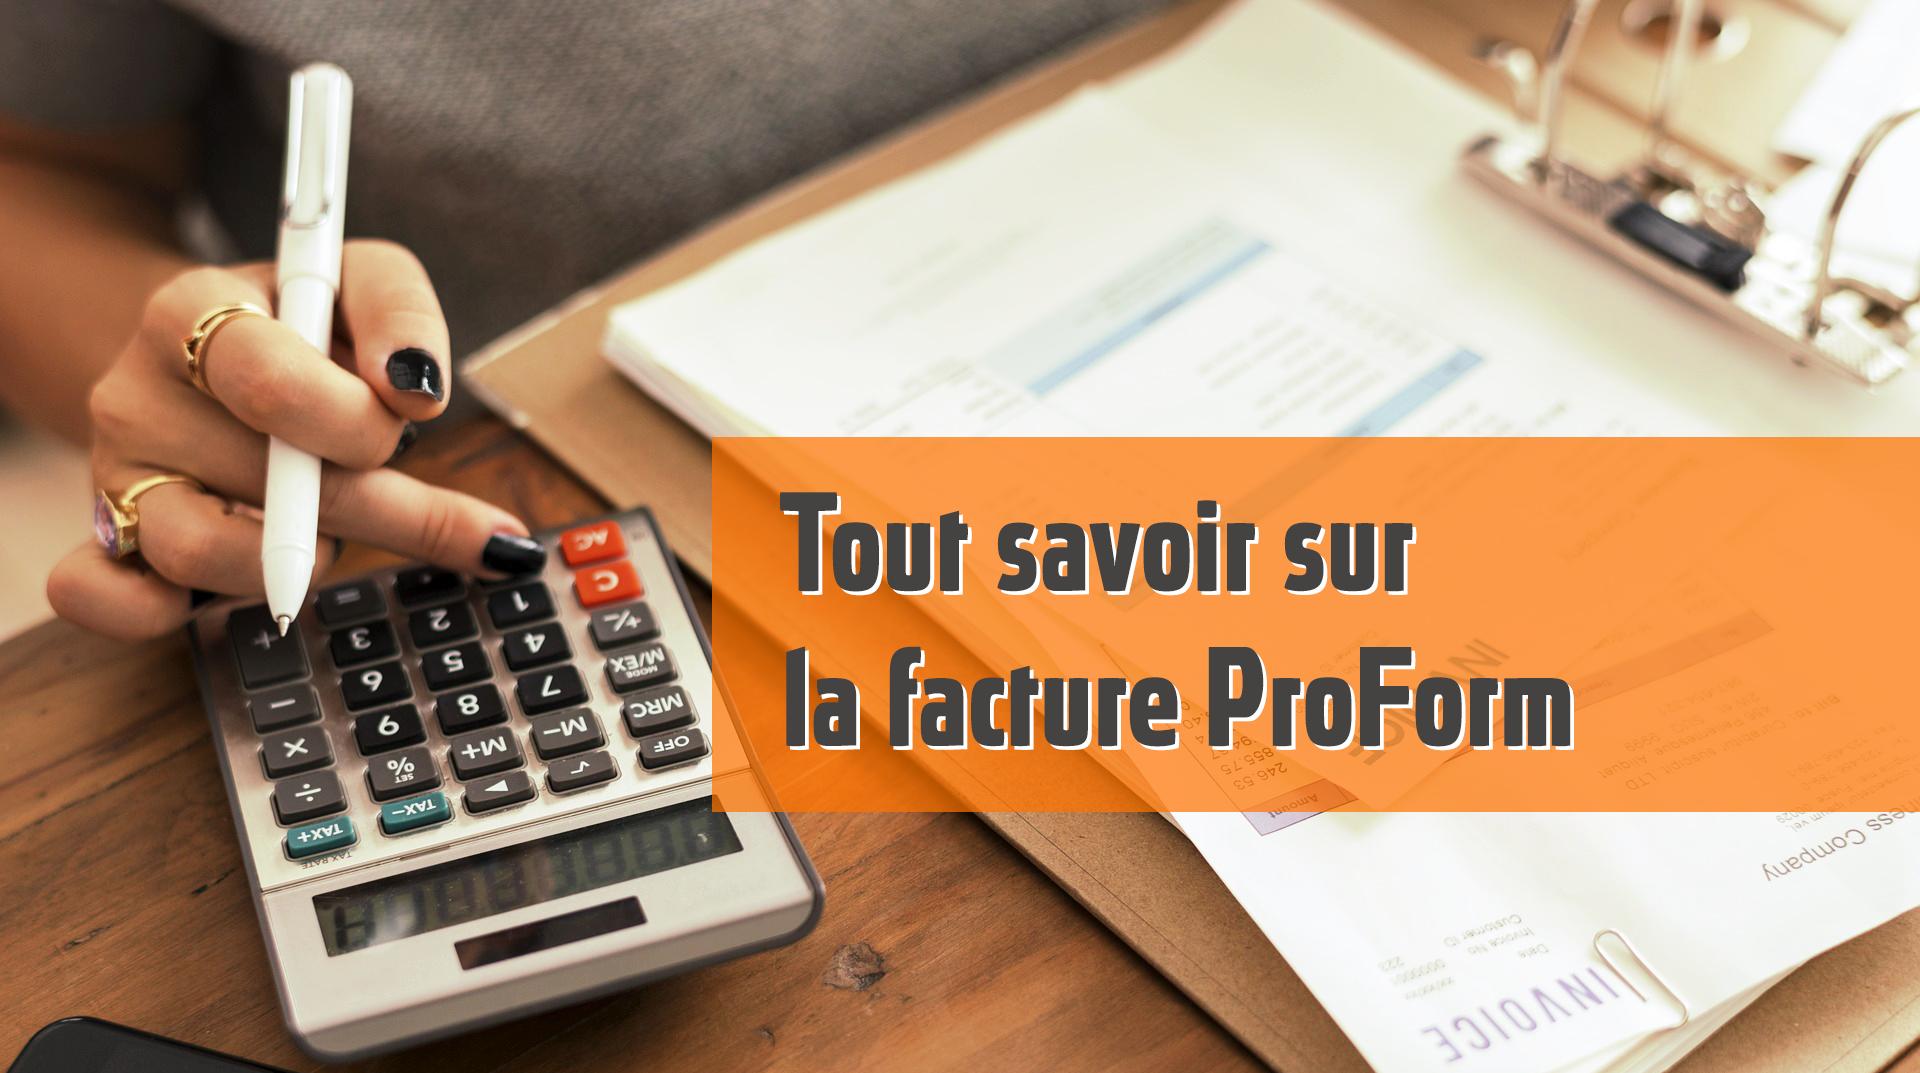 Facture-pro-forma-definition